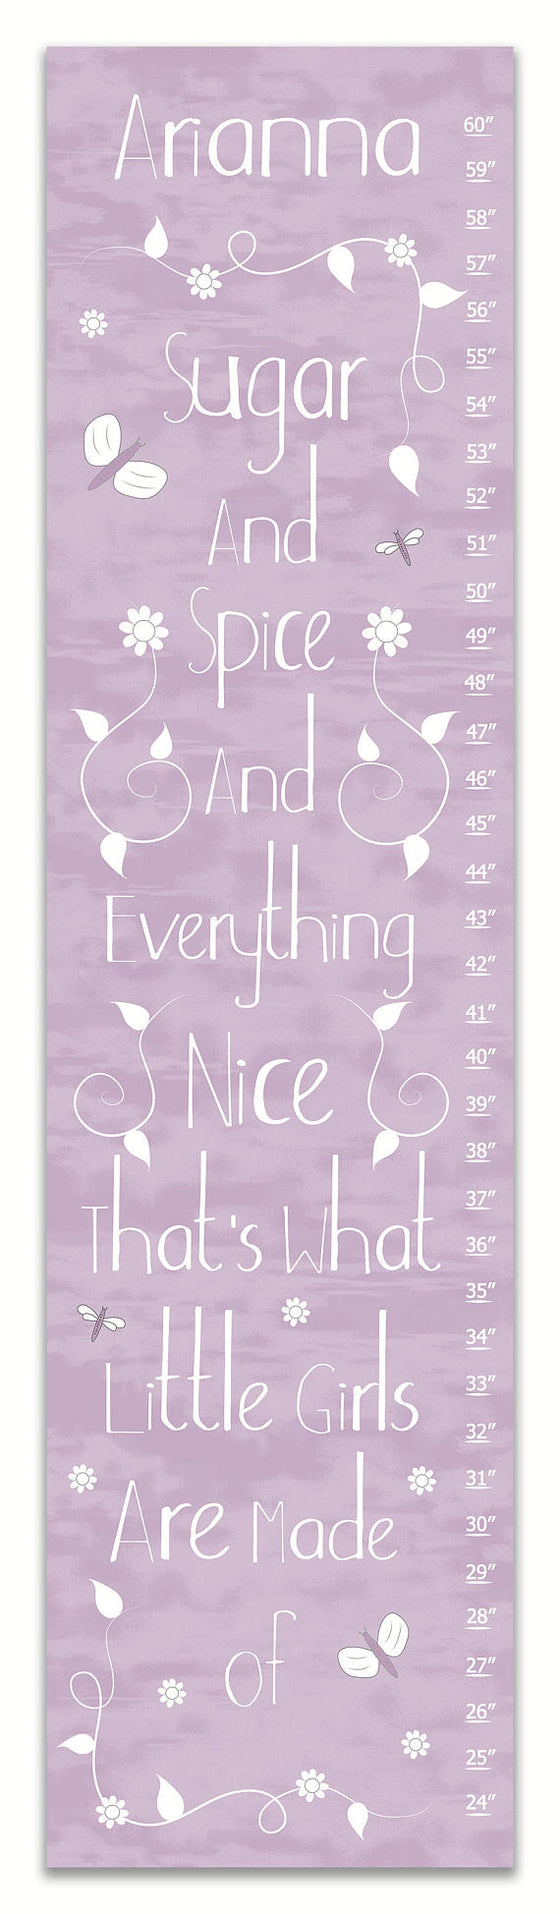 Sugar and Spice Purple Personalized Growth Chart - Nursery Decor